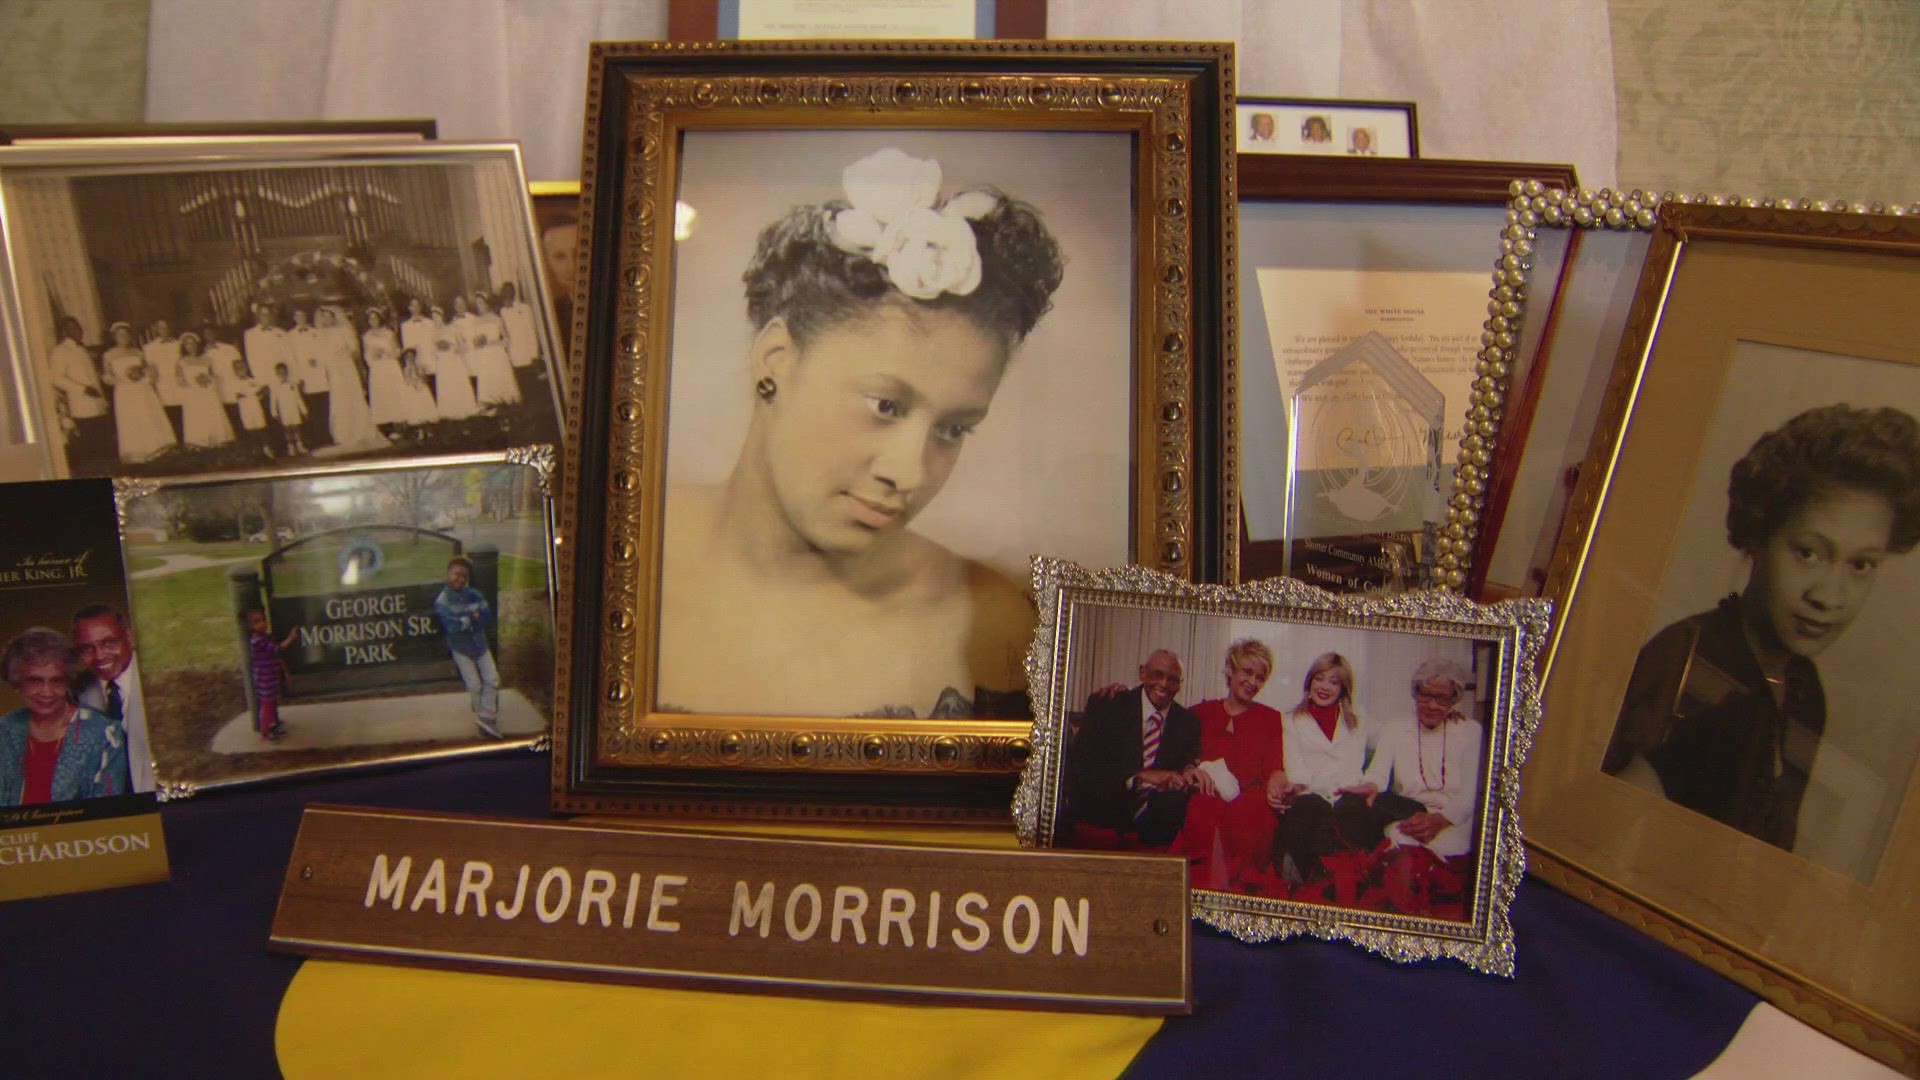 Marjorie Morrison was denied admission to a college due to the color of her skin. That denial created a trailblazing woman who is one of Denver's unsung heroes.